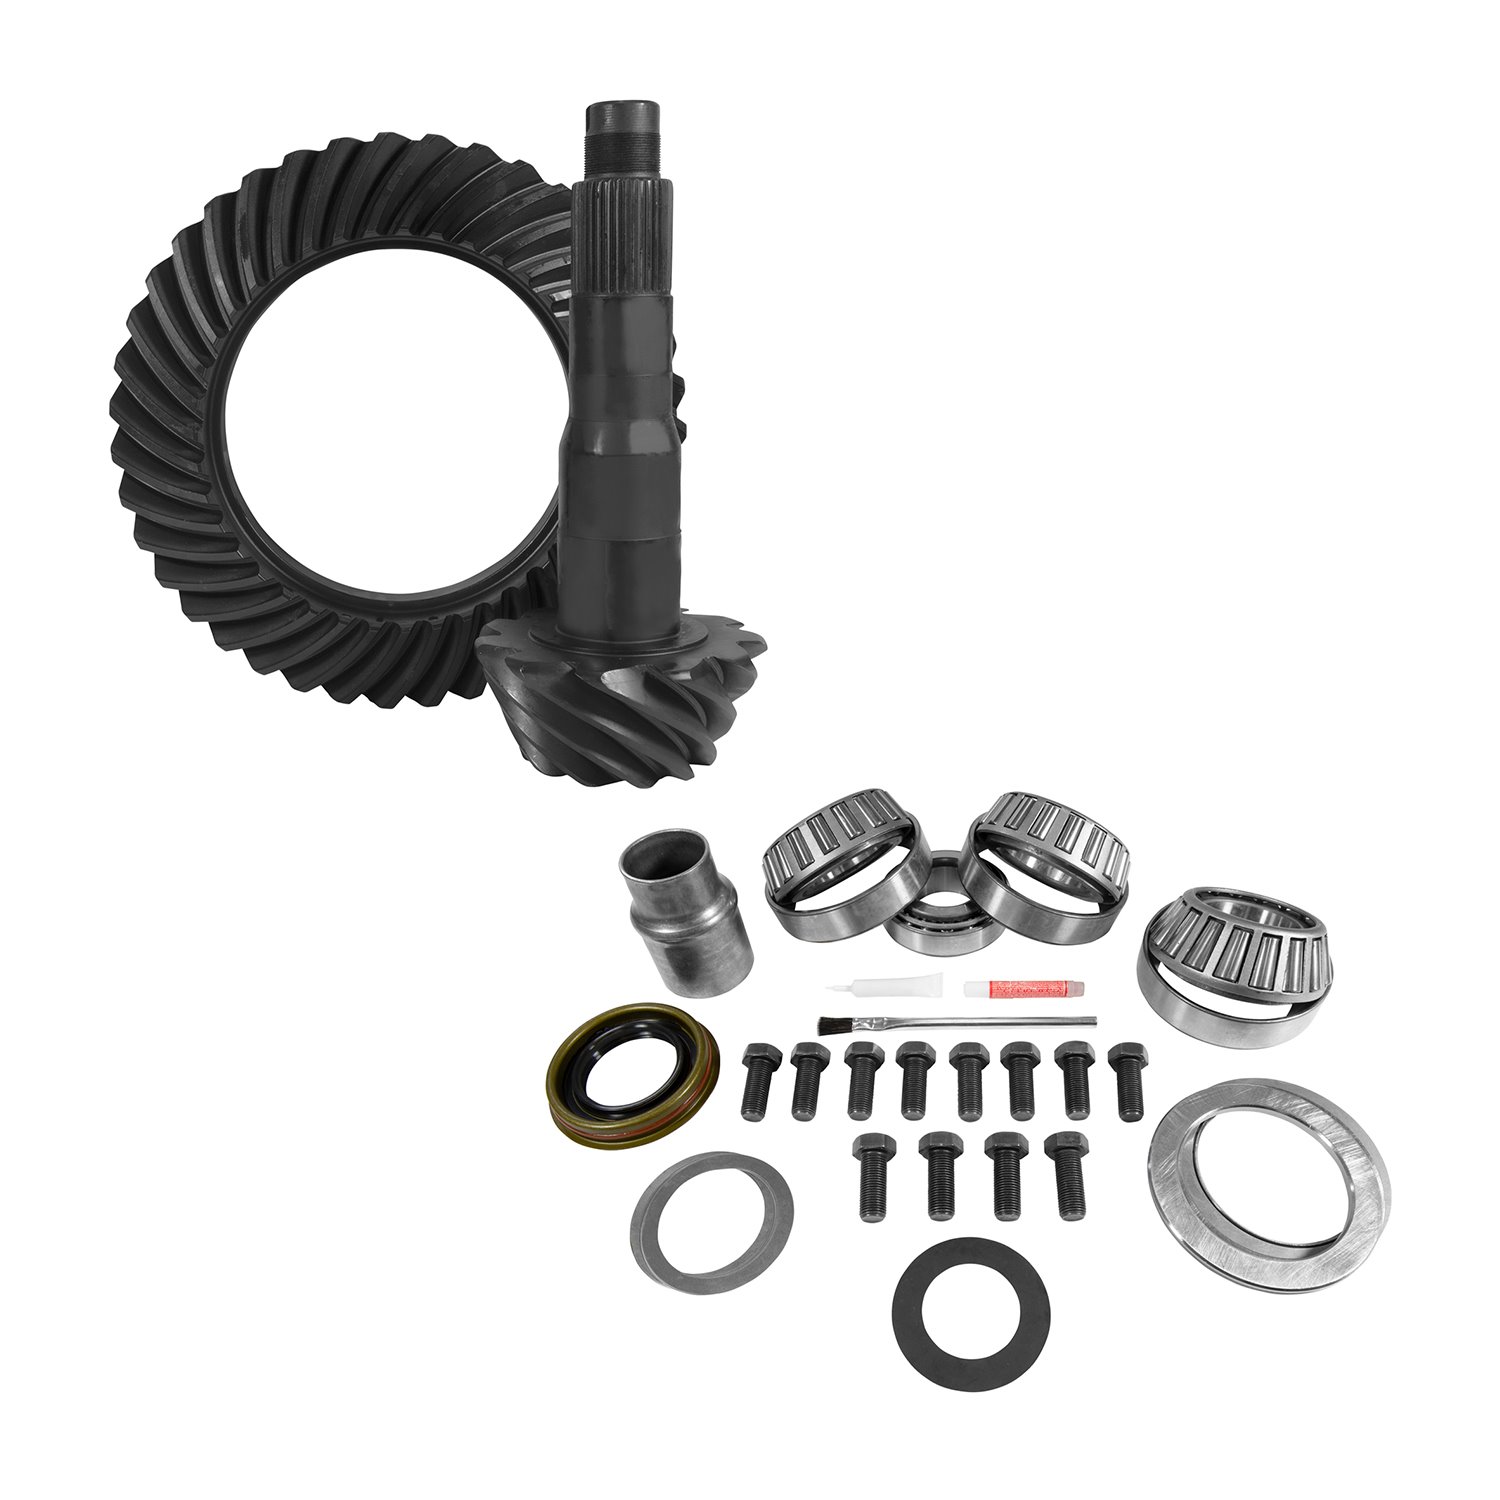 USA Standard 10861 10.5 in. Ford 4.11 Rear Ring & Pinion And Install Kit